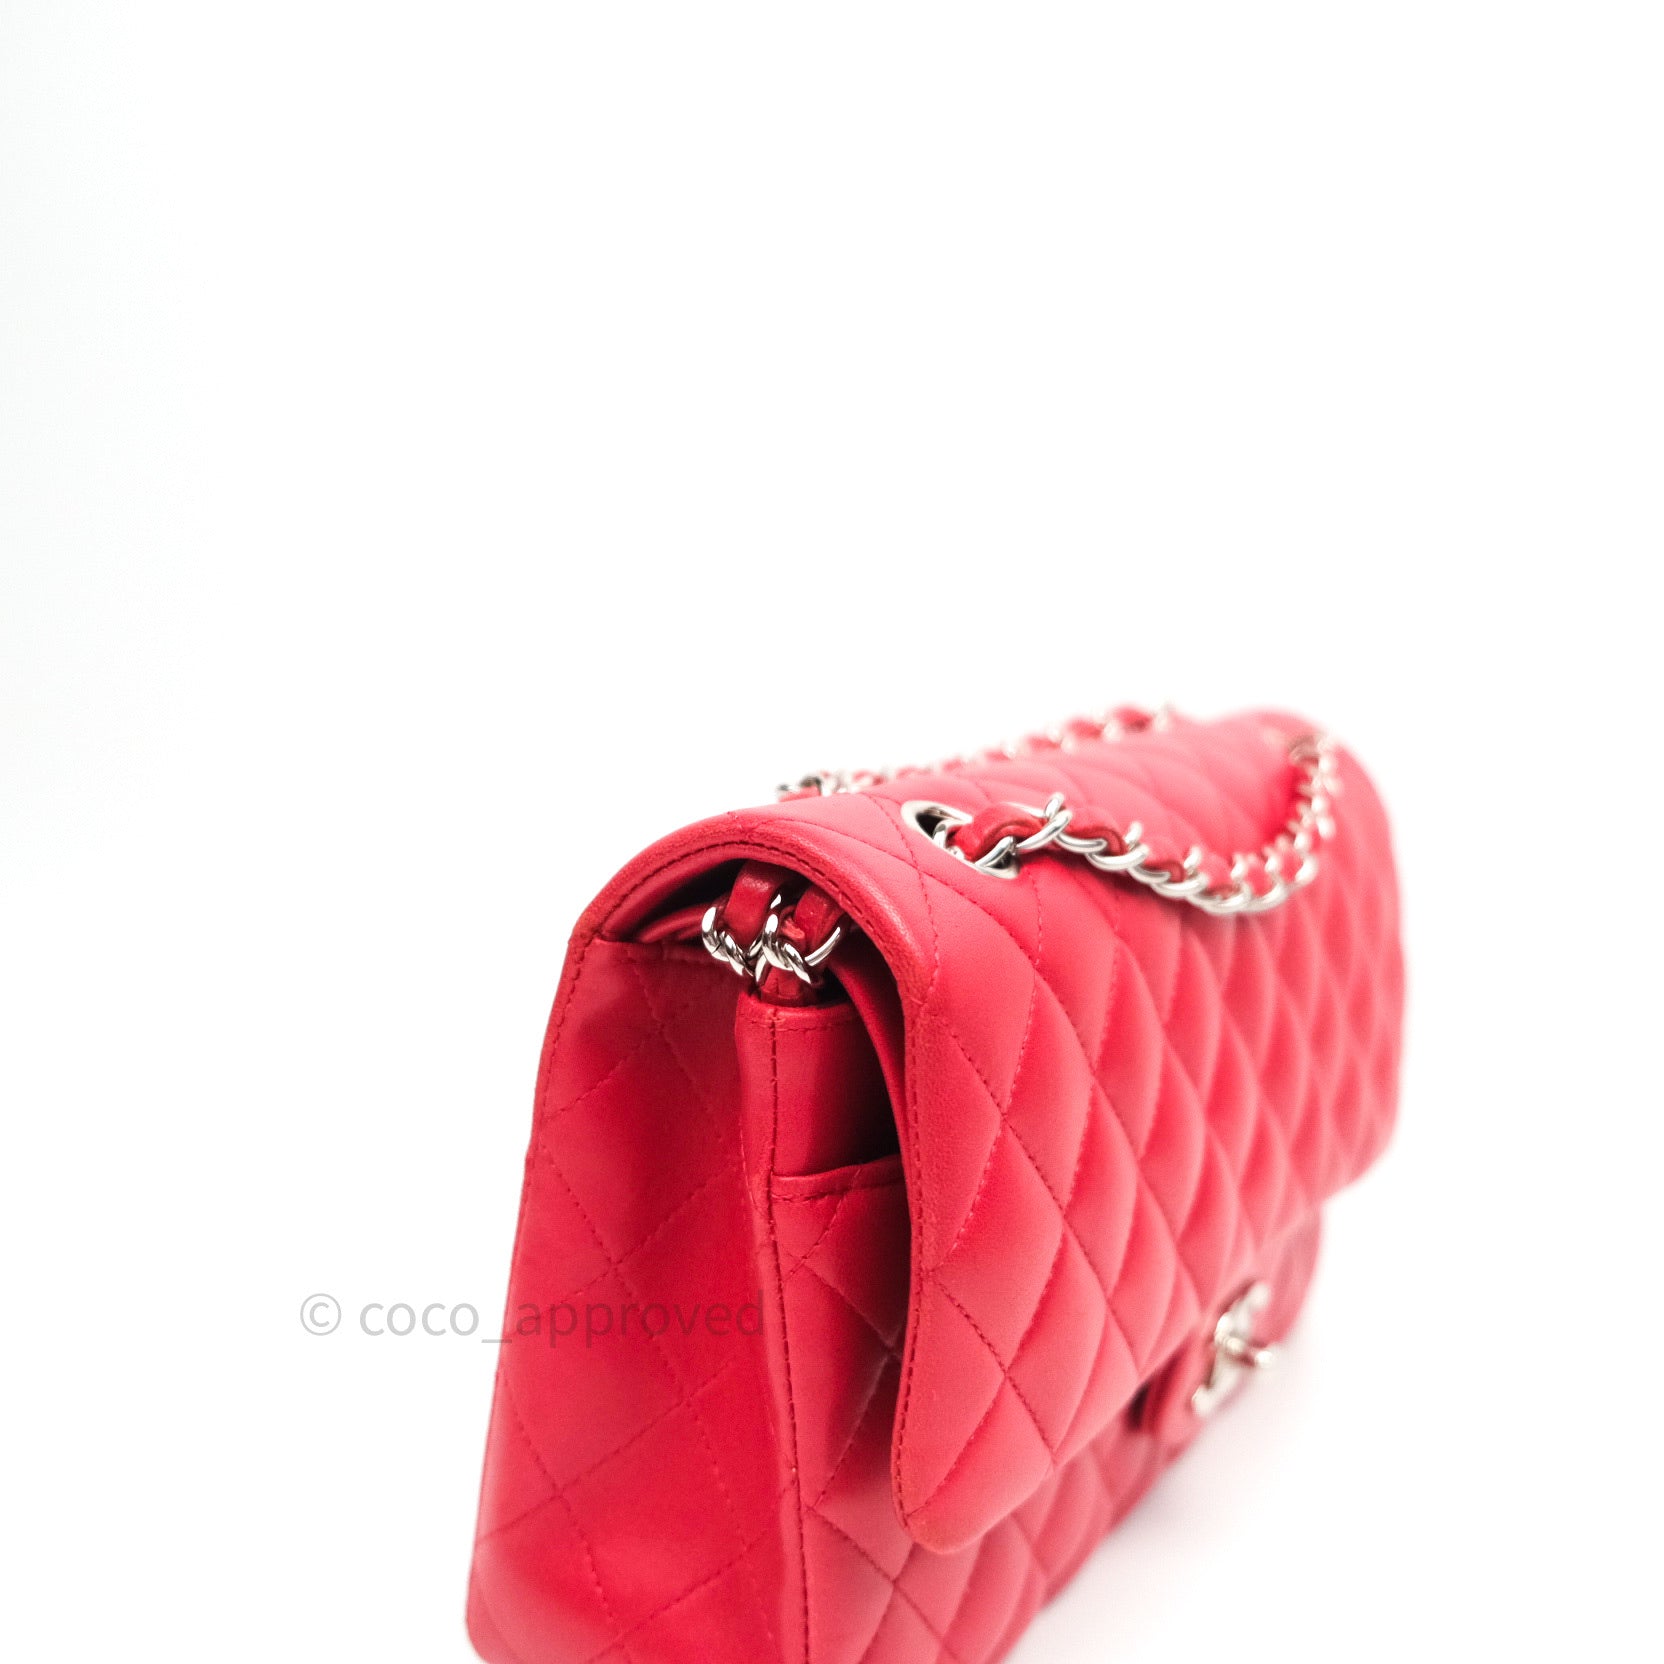 red chanel bag new authentic